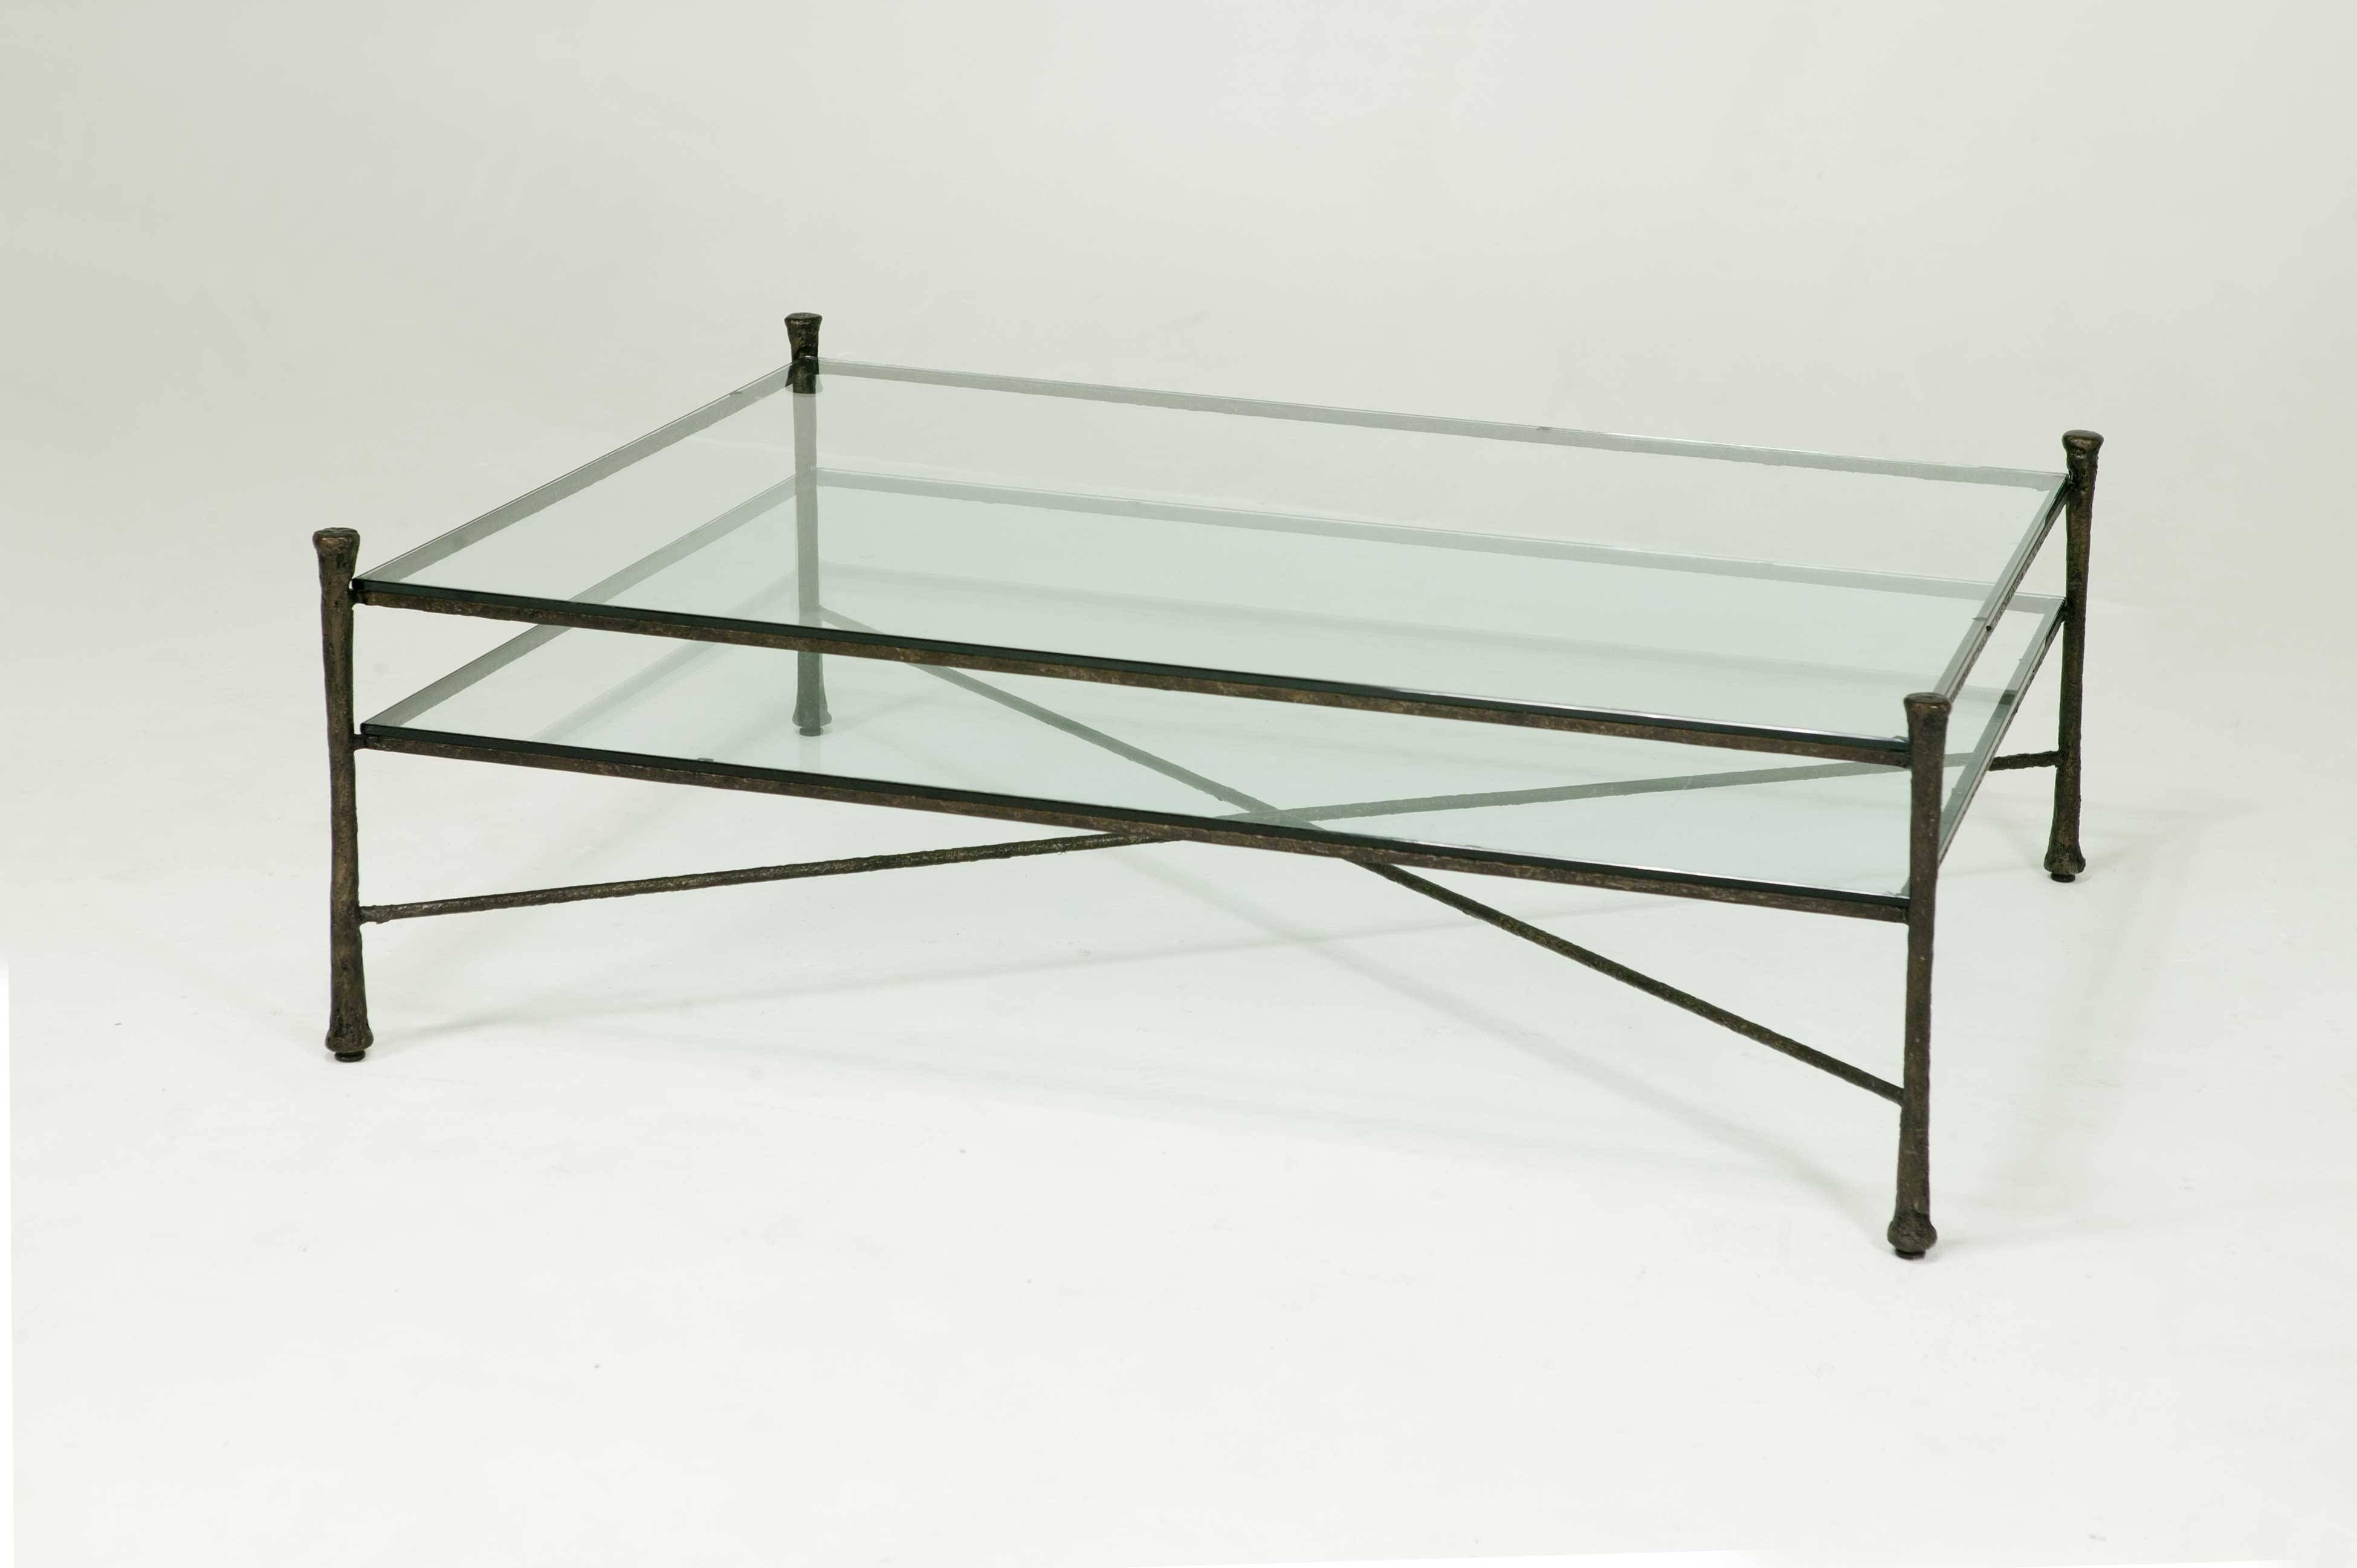 Black Iron Coffee Table Glass Top | Coffee Tables Decoration Intended For Glass And Metal Coffee Tables (View 3 of 30)